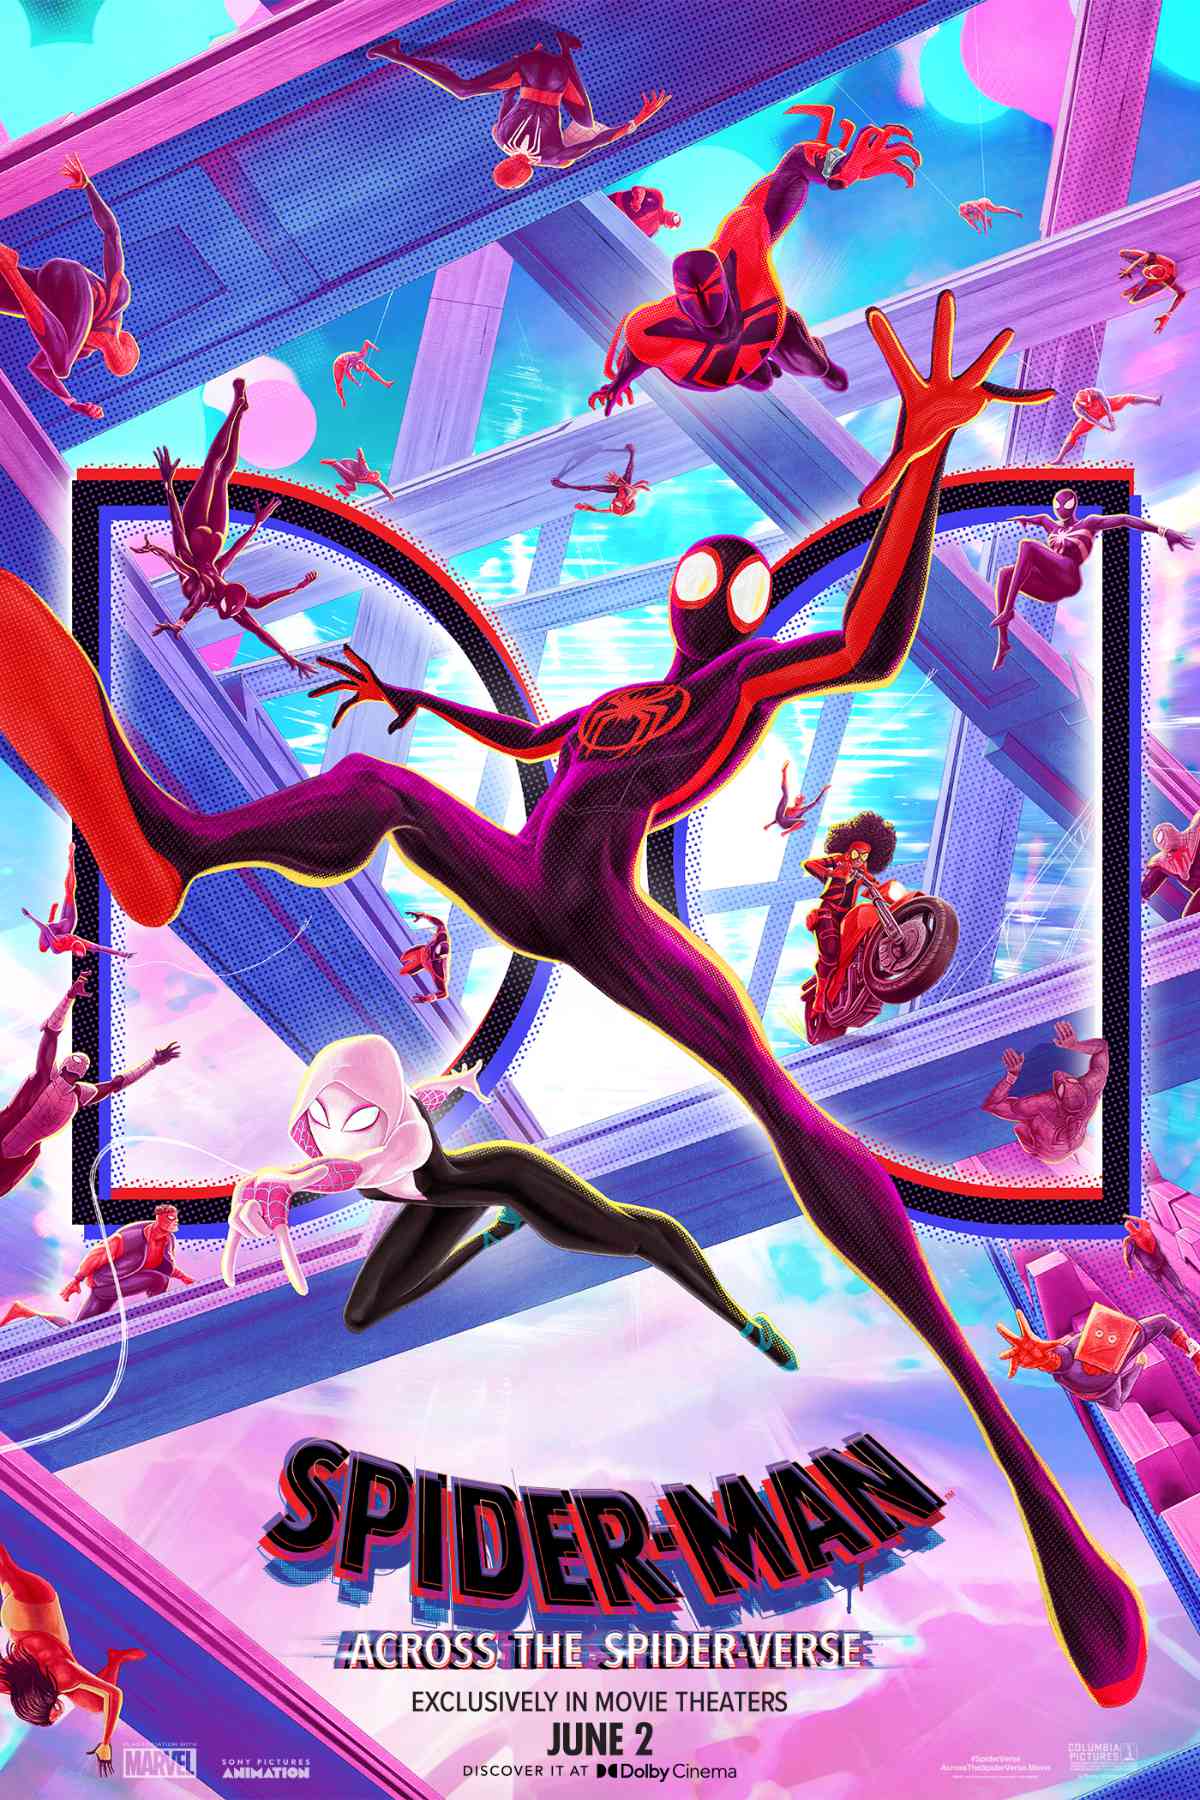 Spider-Man: Across the Spider-Verse Dolby Cinema Poster Debuts